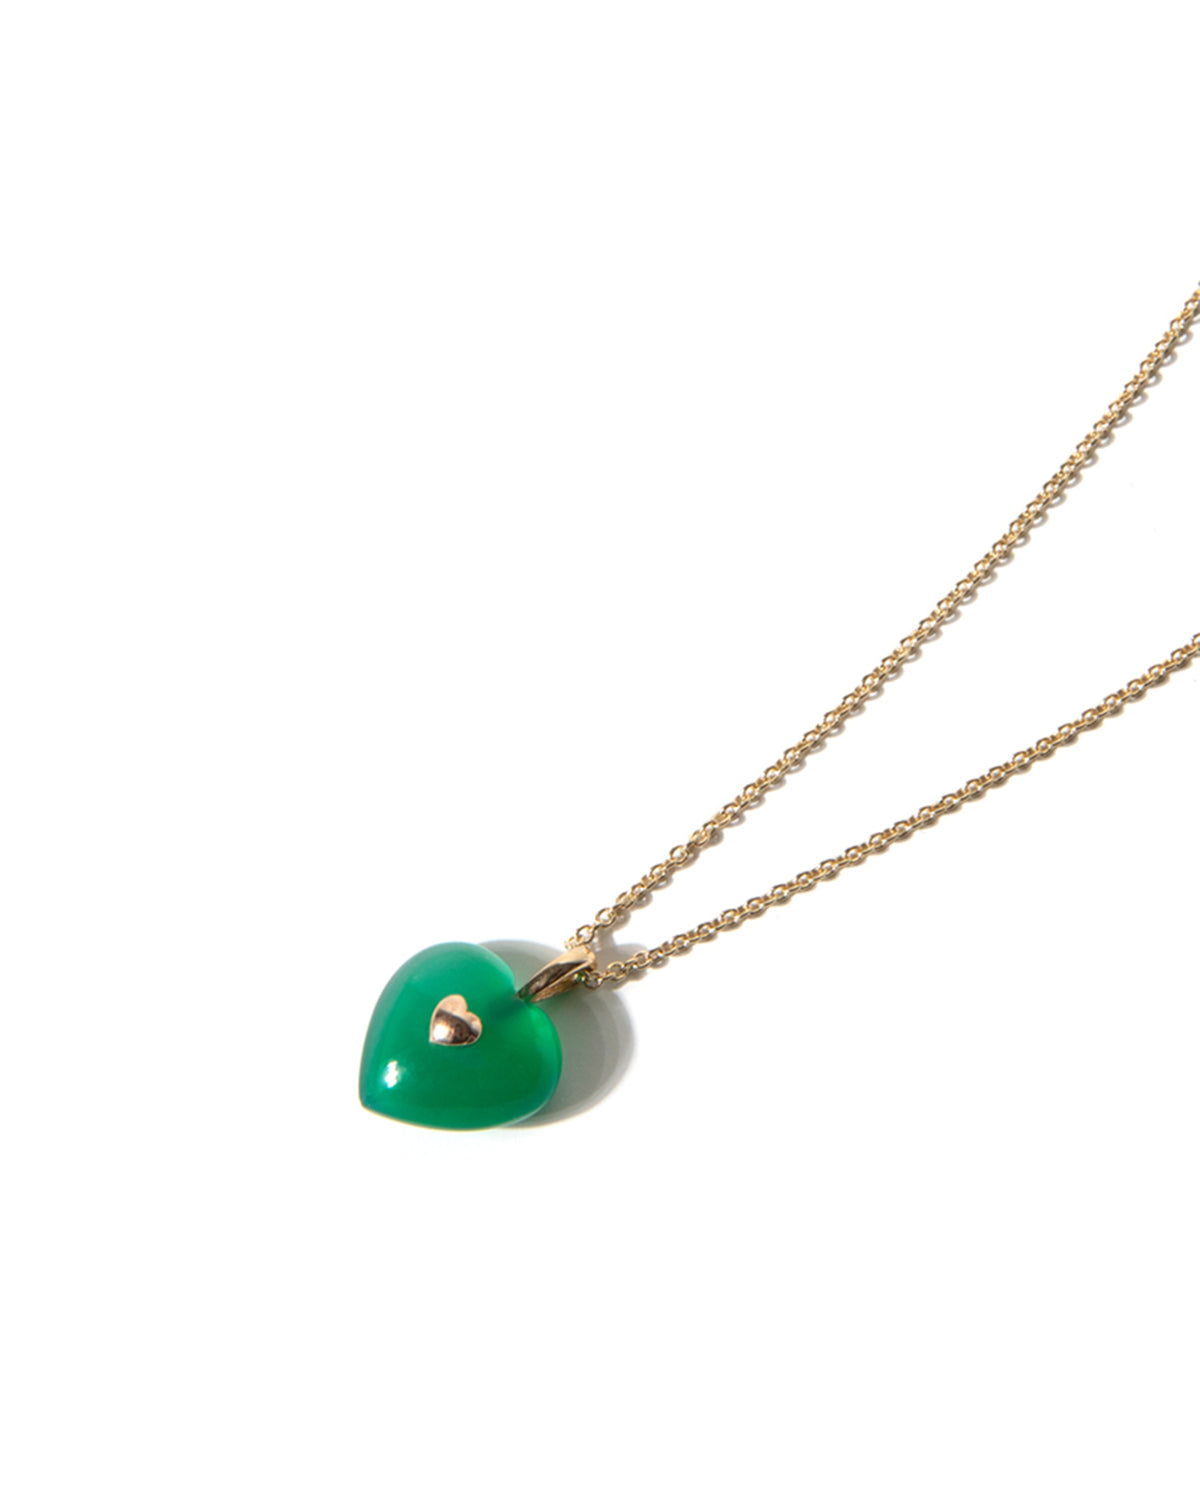 Very Vintage Green Chalcedony Heart Pendant Necklace